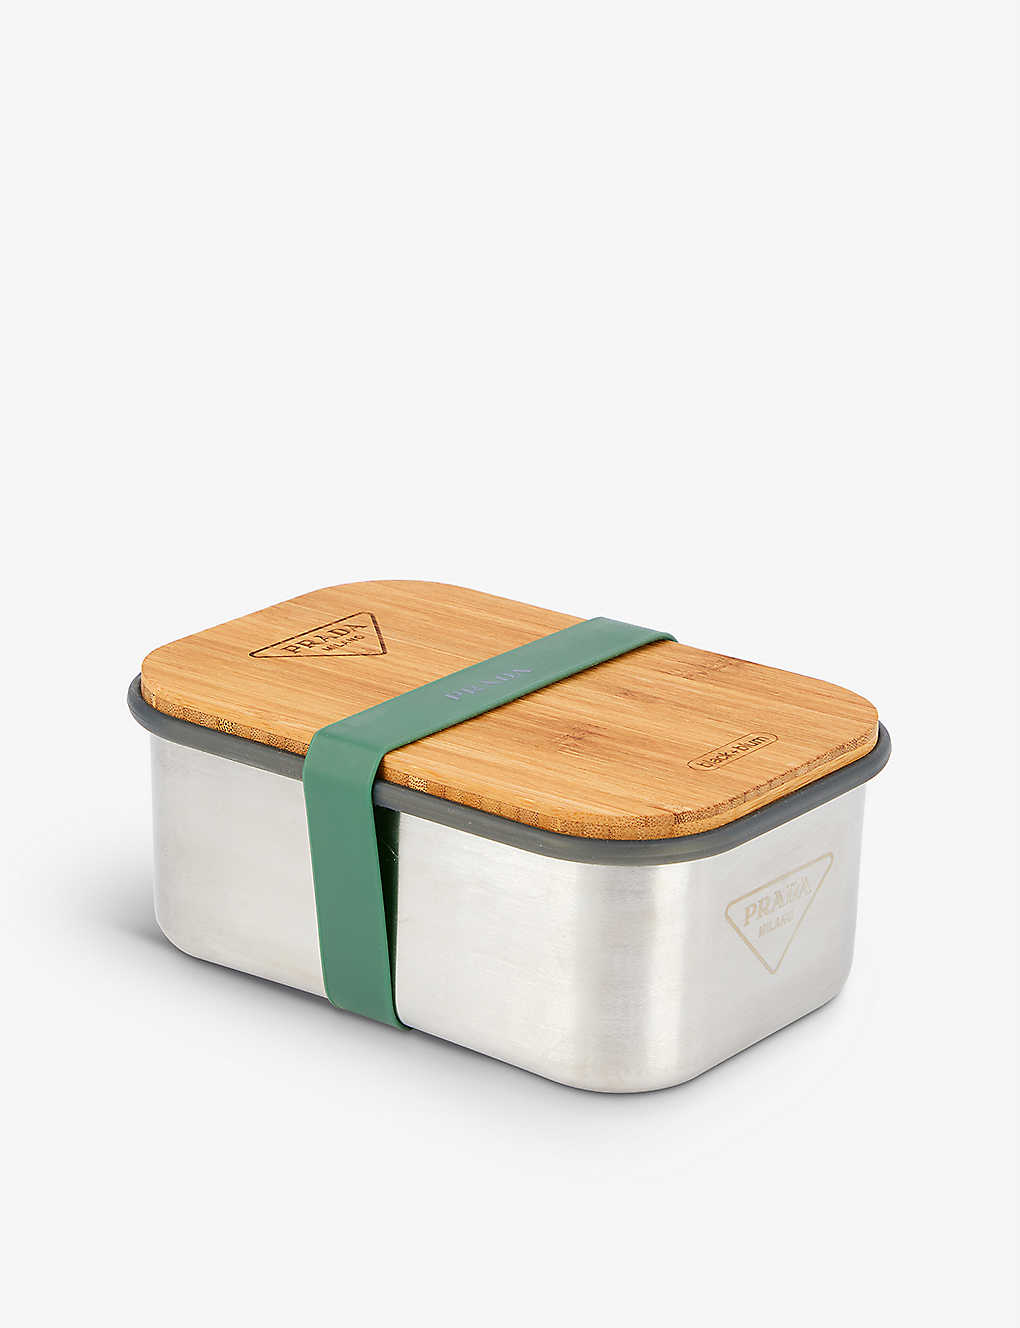 Prada x Black+Blum stainless-steel, bamboo and silicone lunch box(9235014)